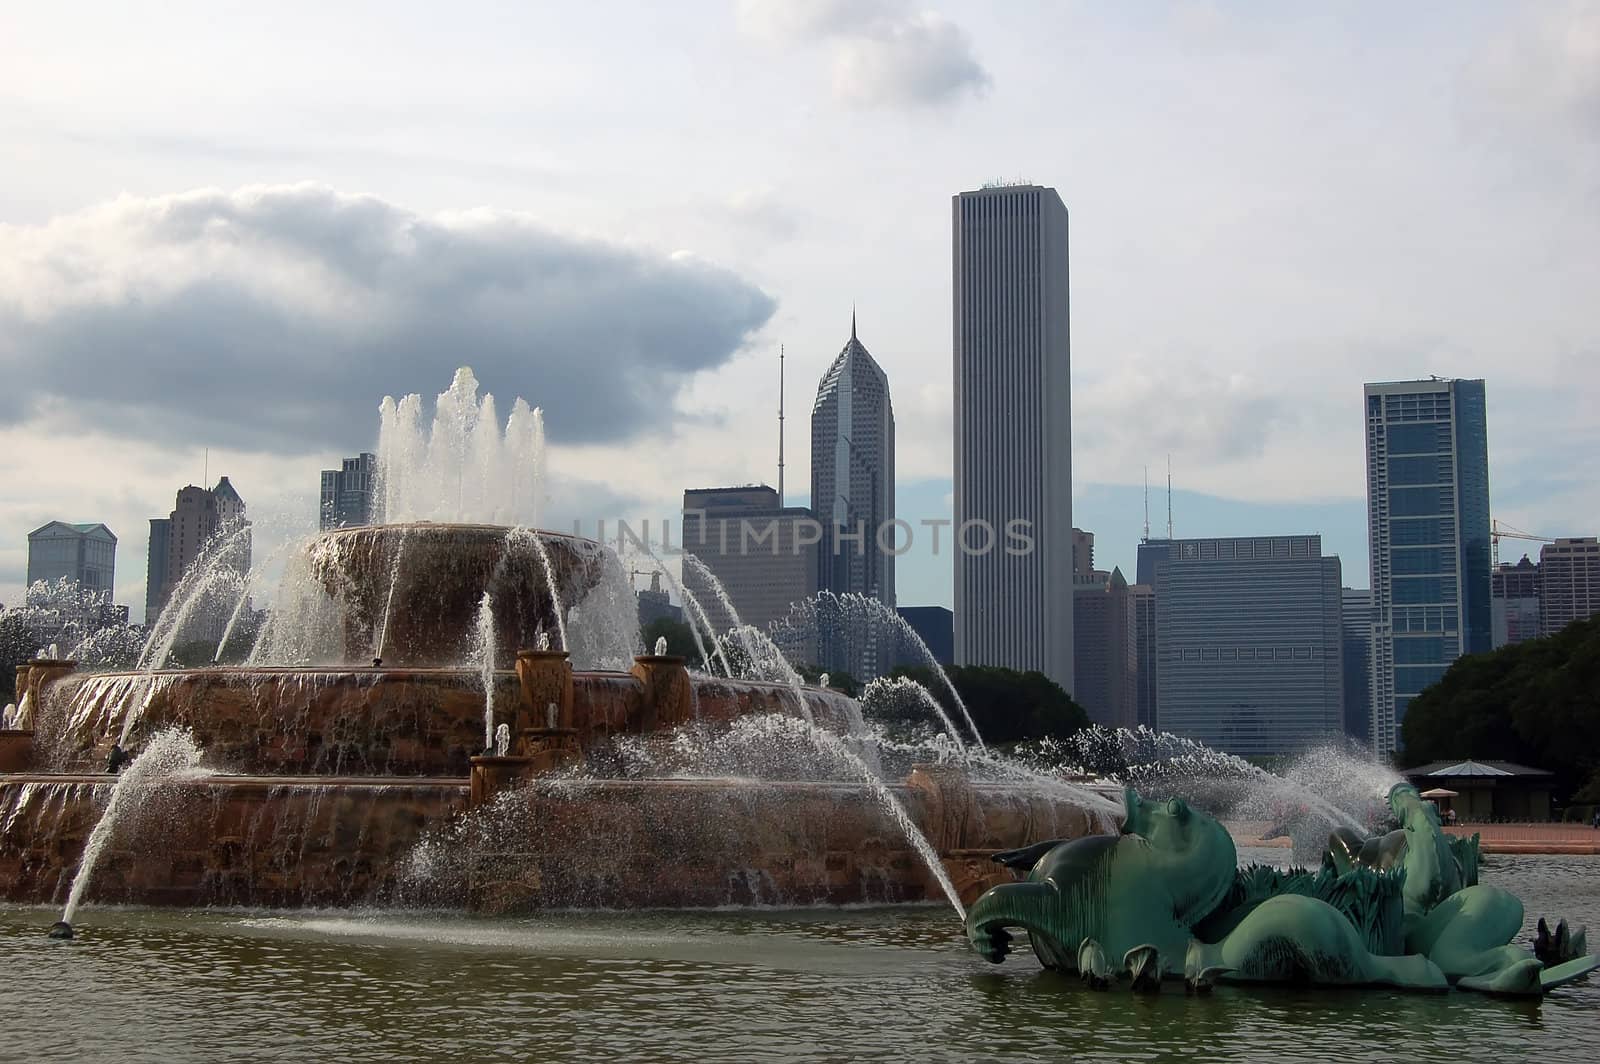 Close-up picture of Buckingham Fountain in Chicago